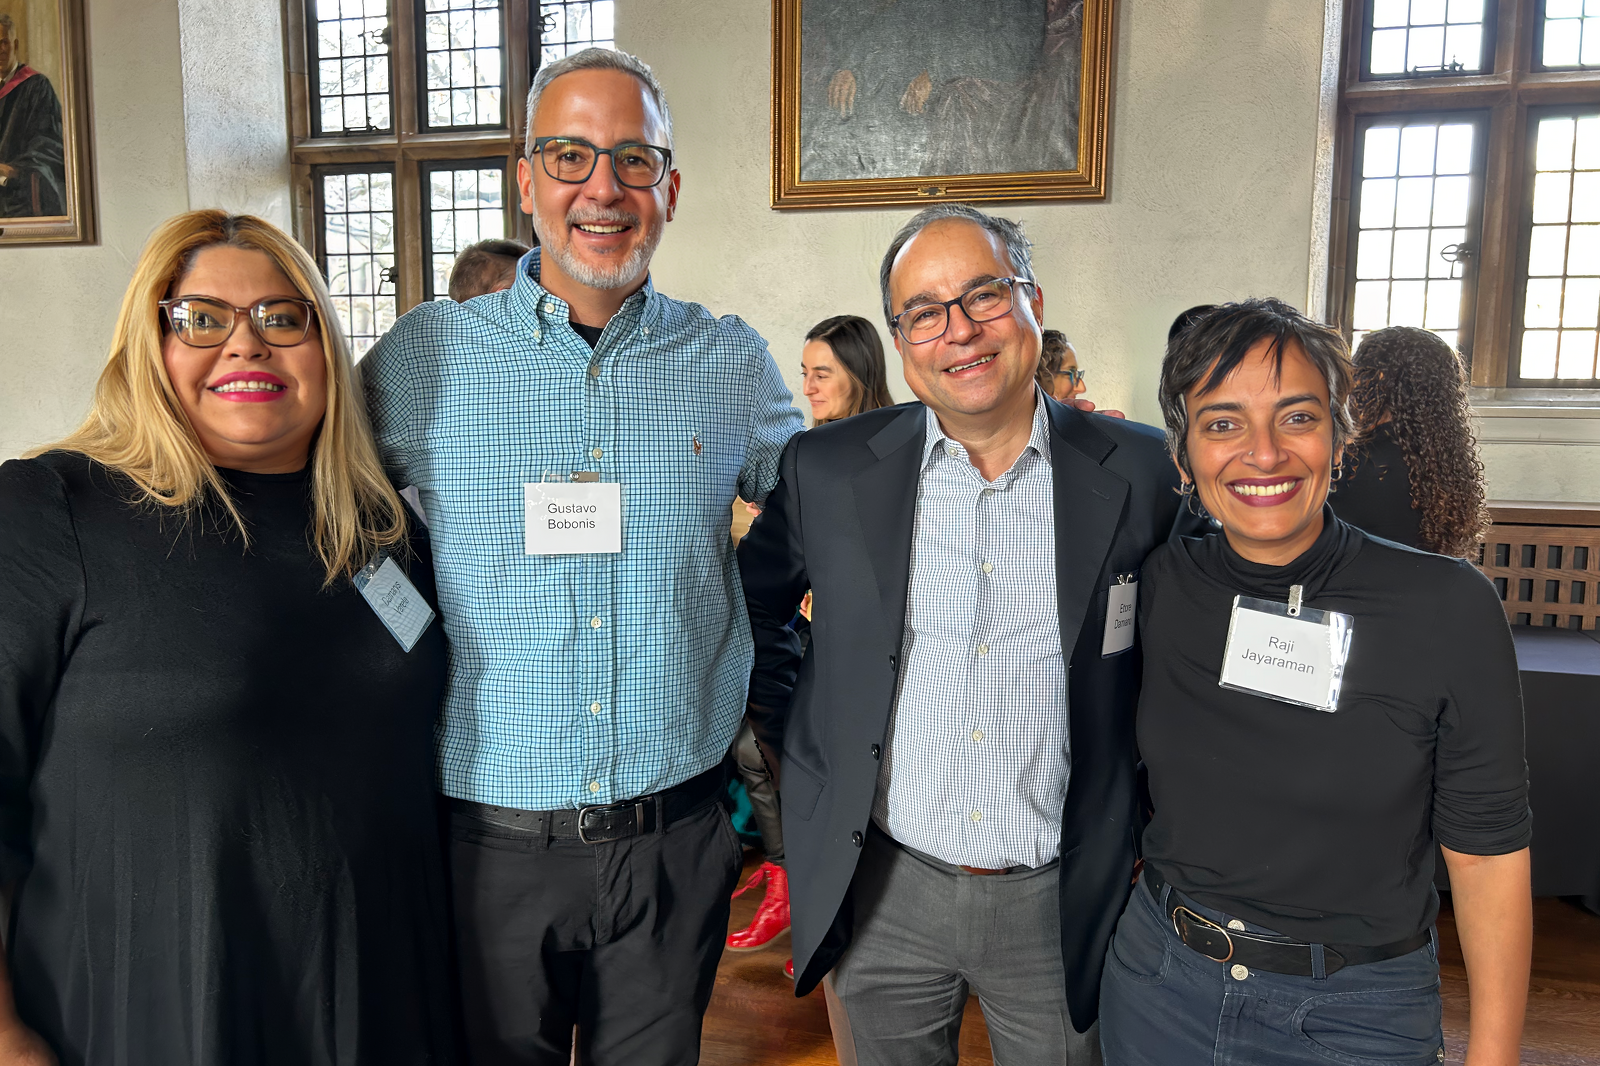 FOS, Puerto Rico Department of Education, and Department of Economics at UofT